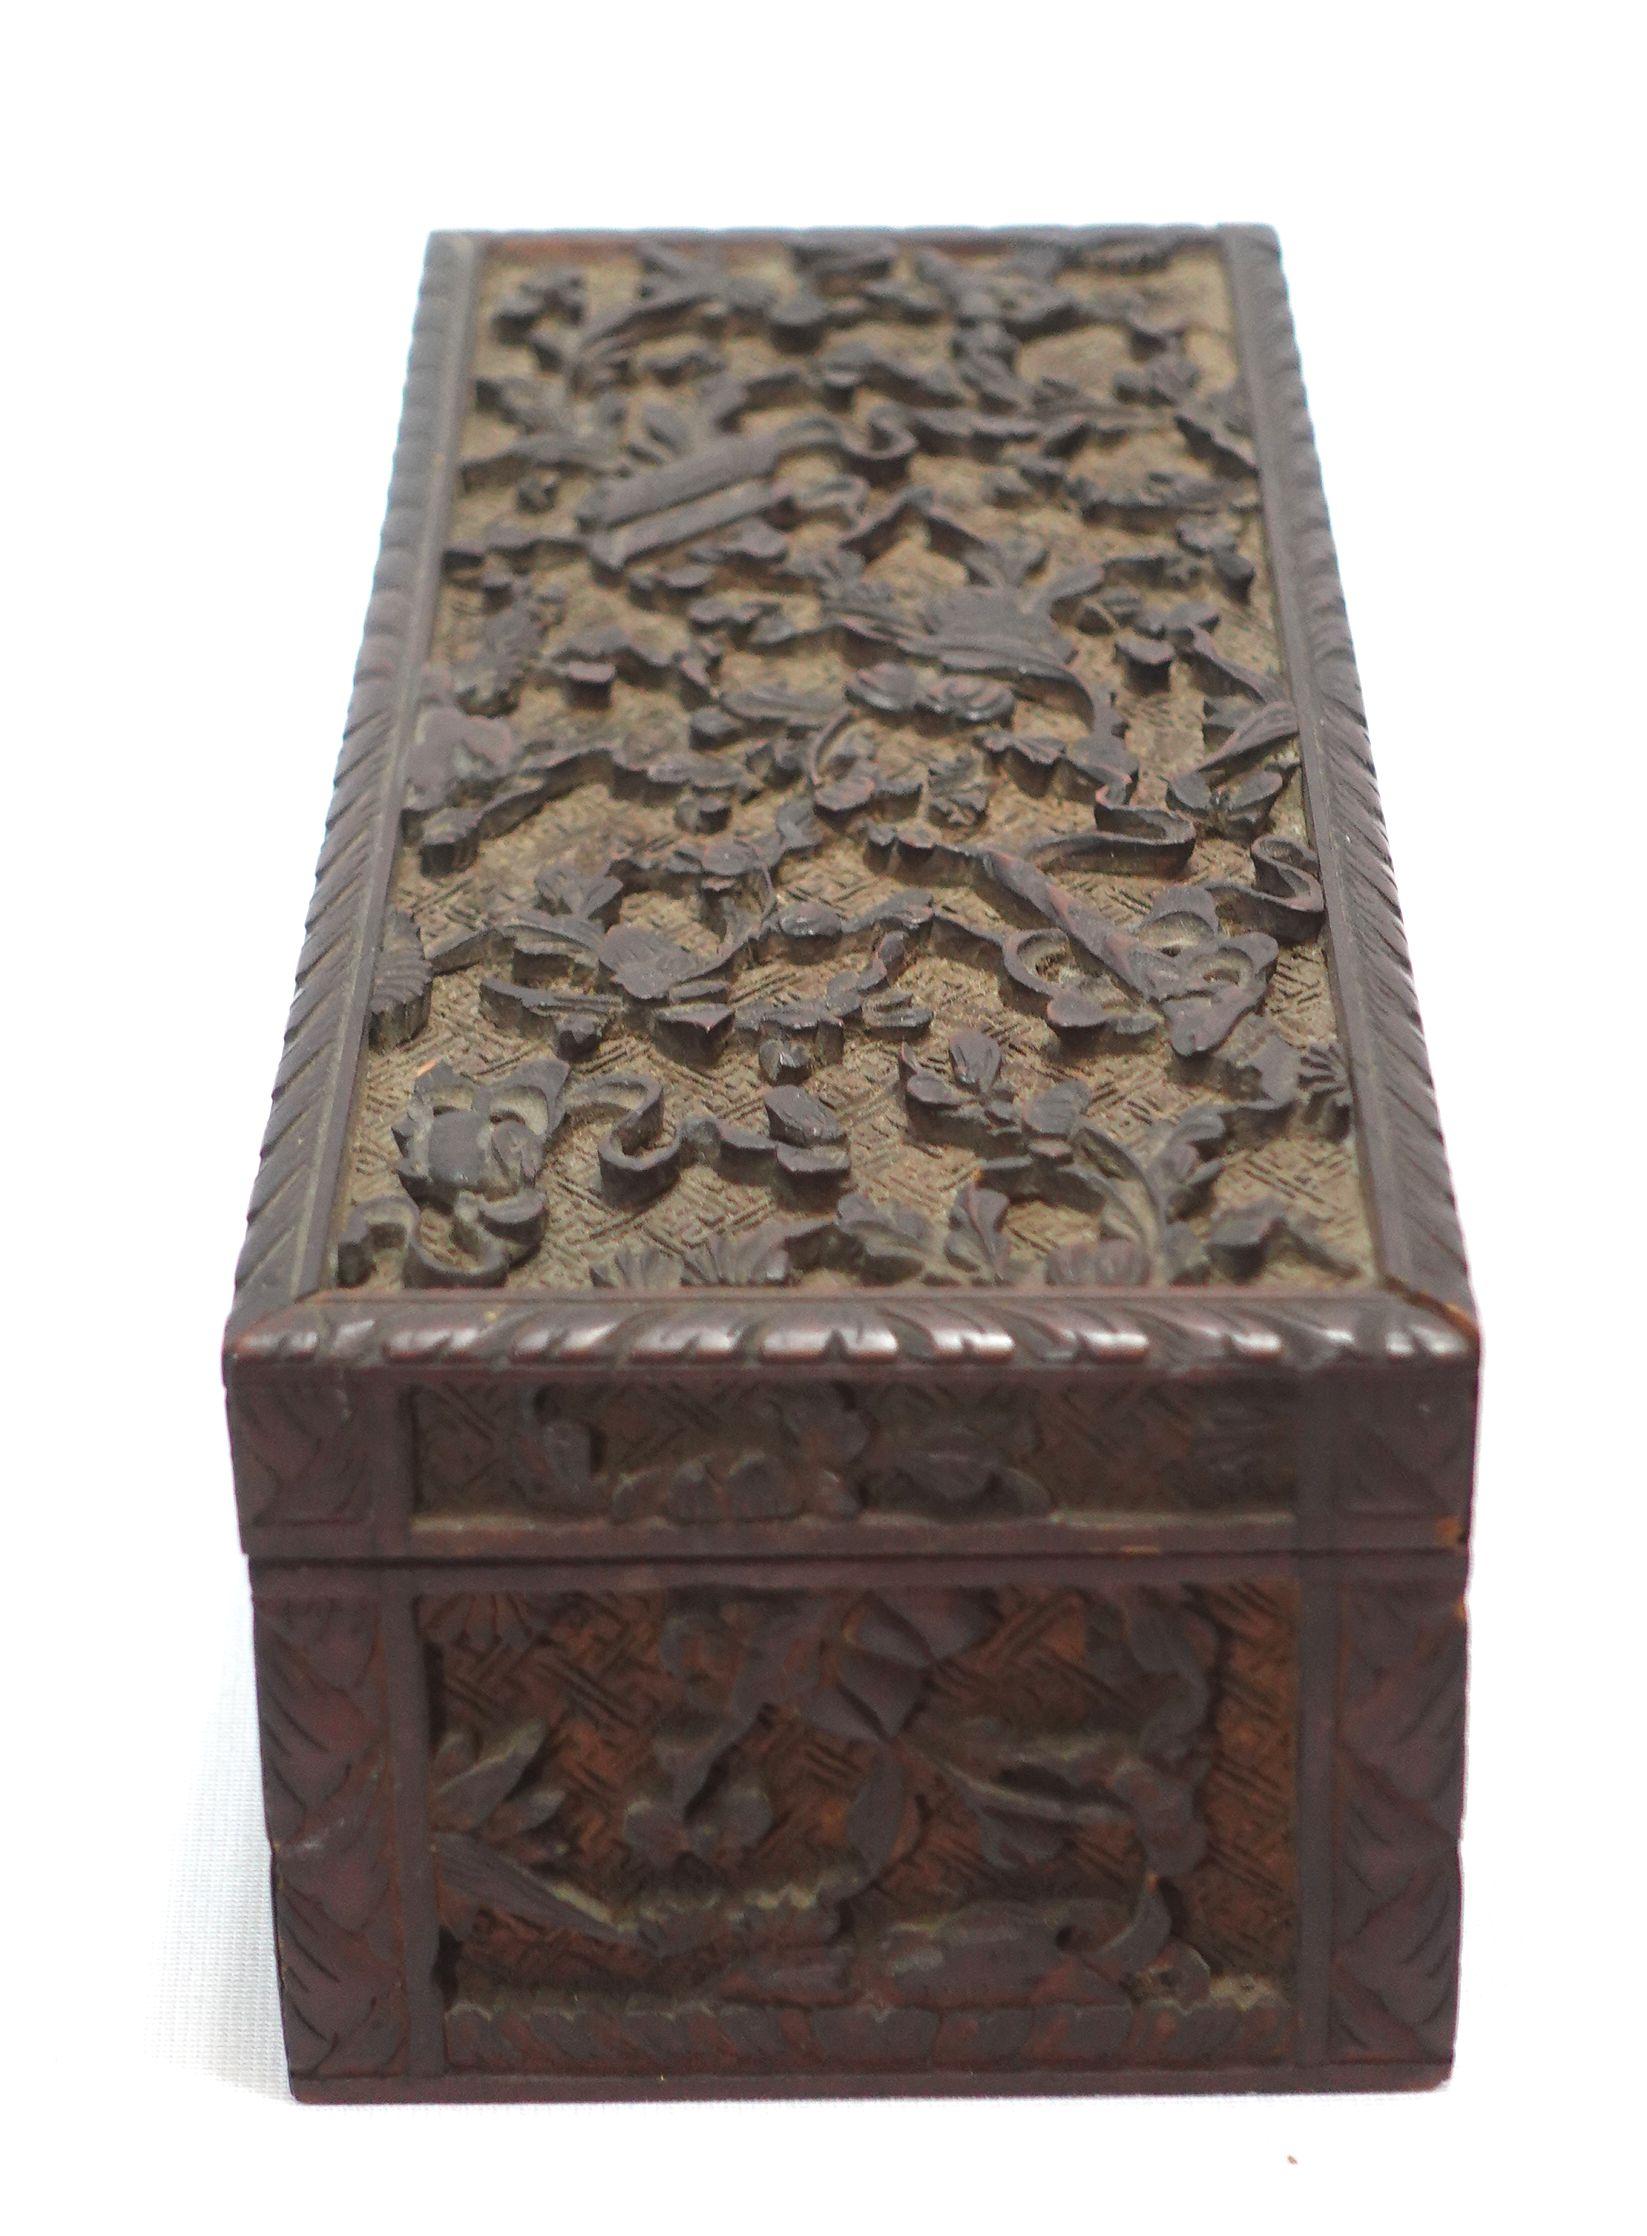 Antique Chinese Elaborately Relief Carved Glove Box W/ Original Hinges and Lock For Sale 2